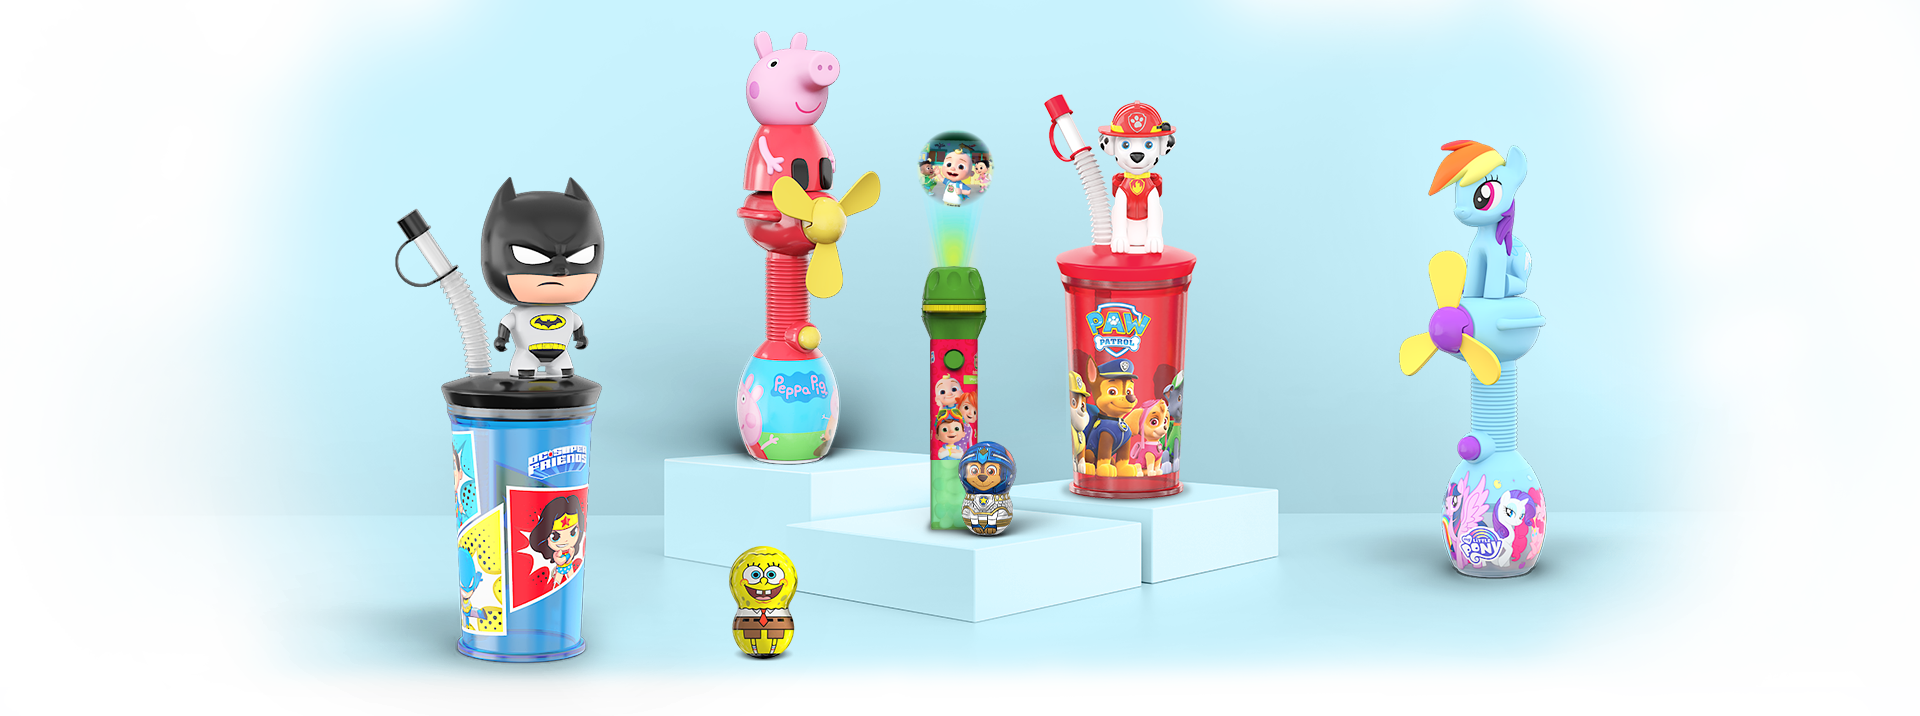 Children’s Day candy toys